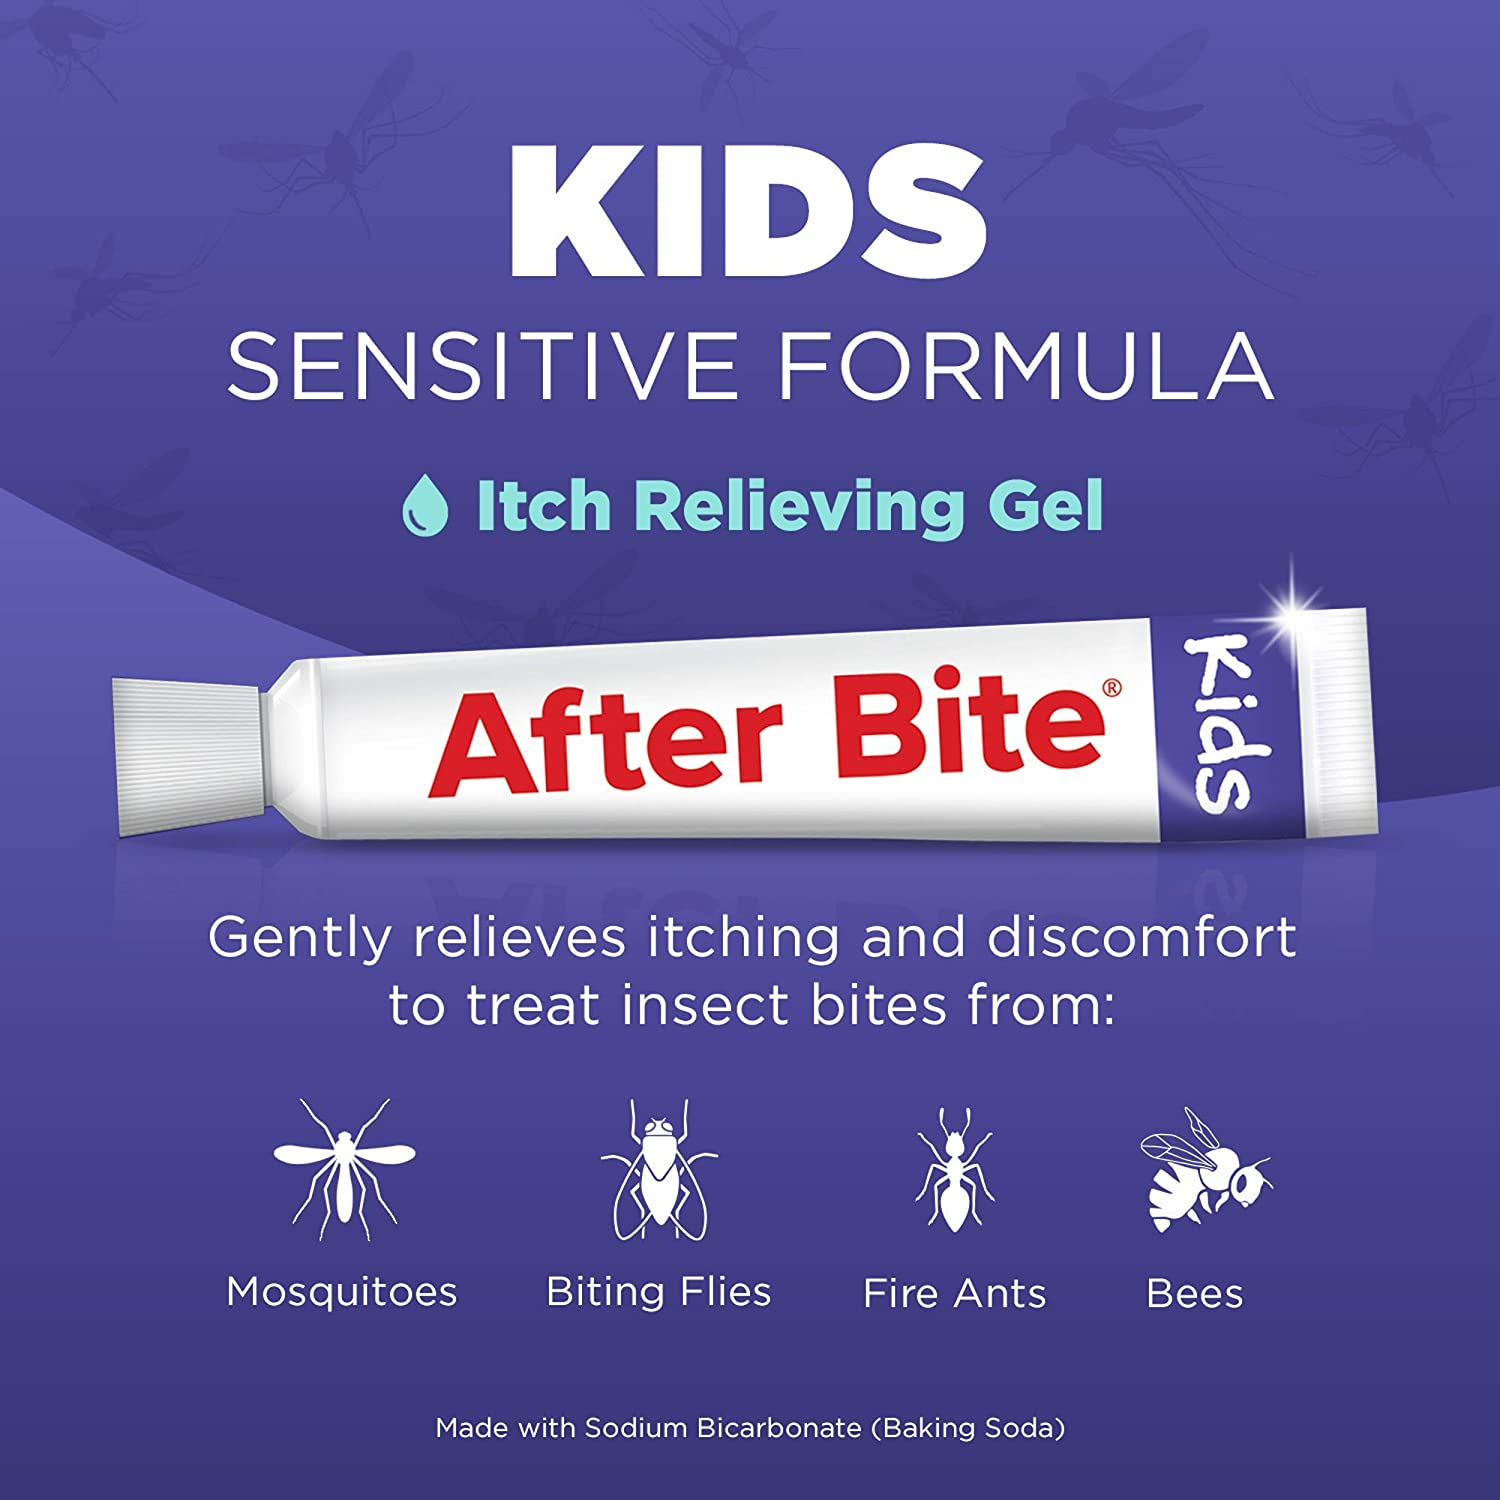 After Bite Kids, Sensitive Formula, Pharmacist Preferred Insect Bite & Sting Treatment, Natural Healing, Aloe Vera, Skin Protectant, Portable Instant Relief, Stop Itching Cream, 0.7-ounce - image 3 of 9